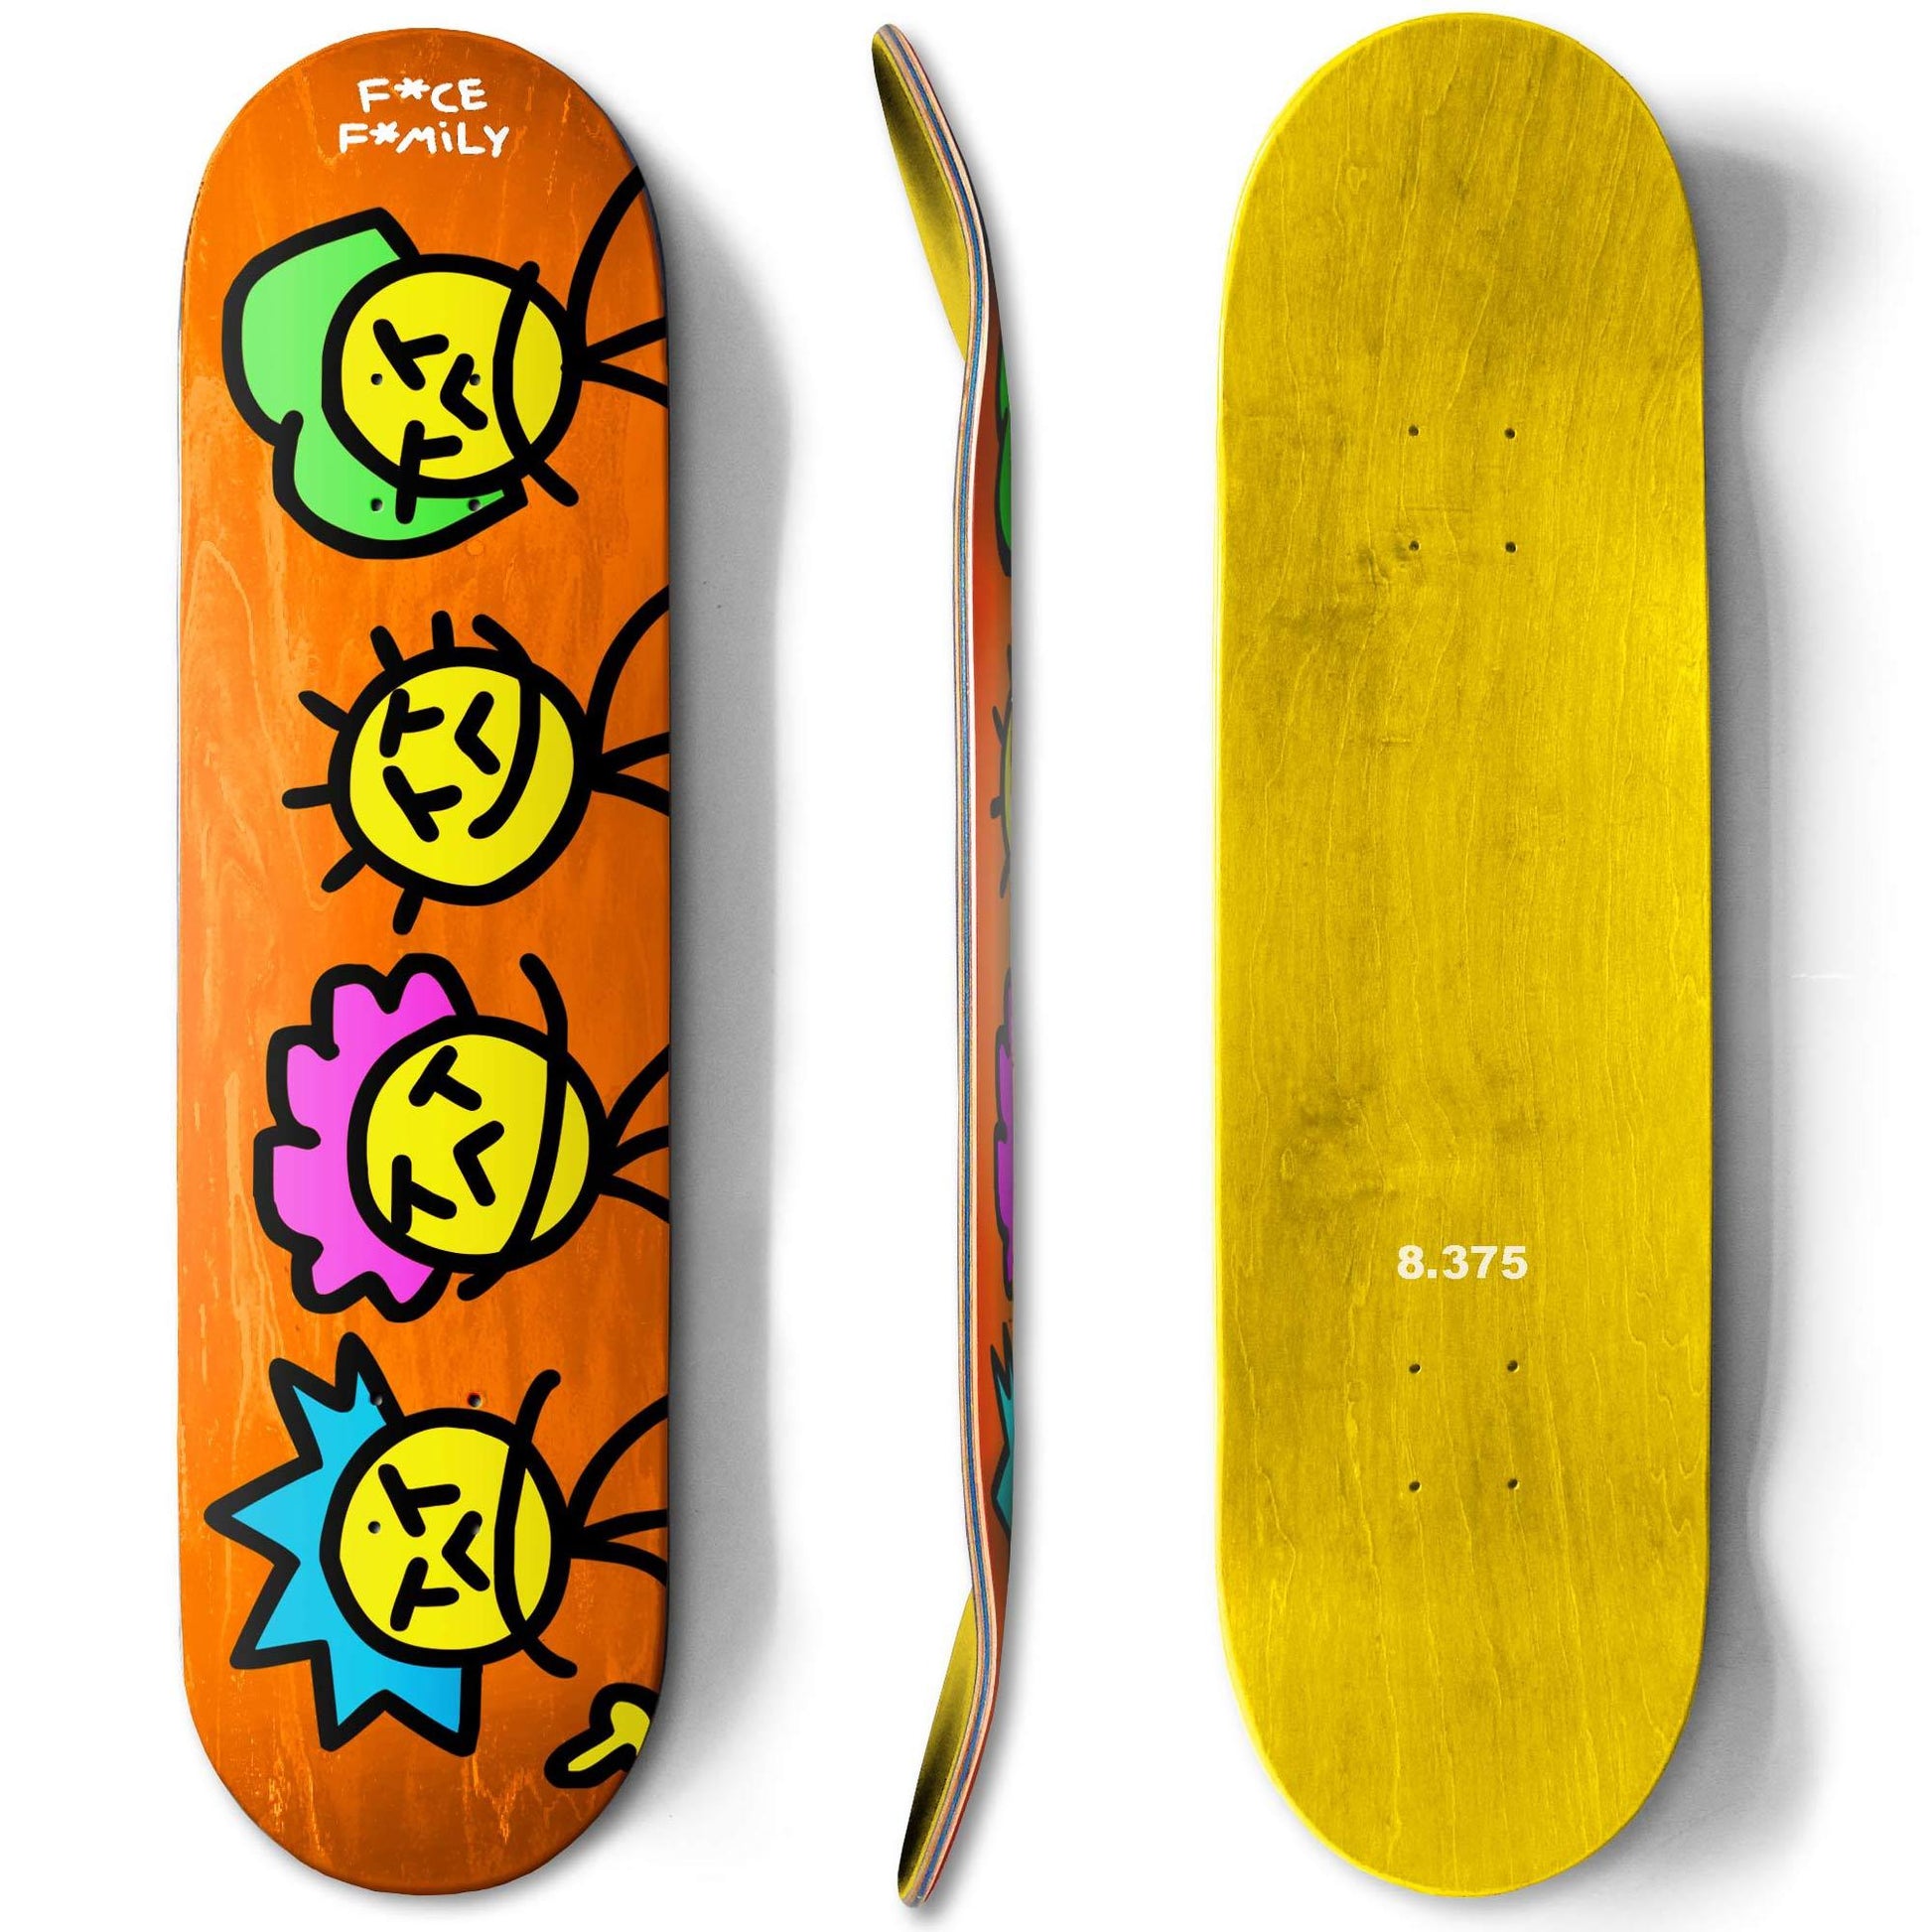 F*CE F*MILY Team Deck (Assorted Colors)